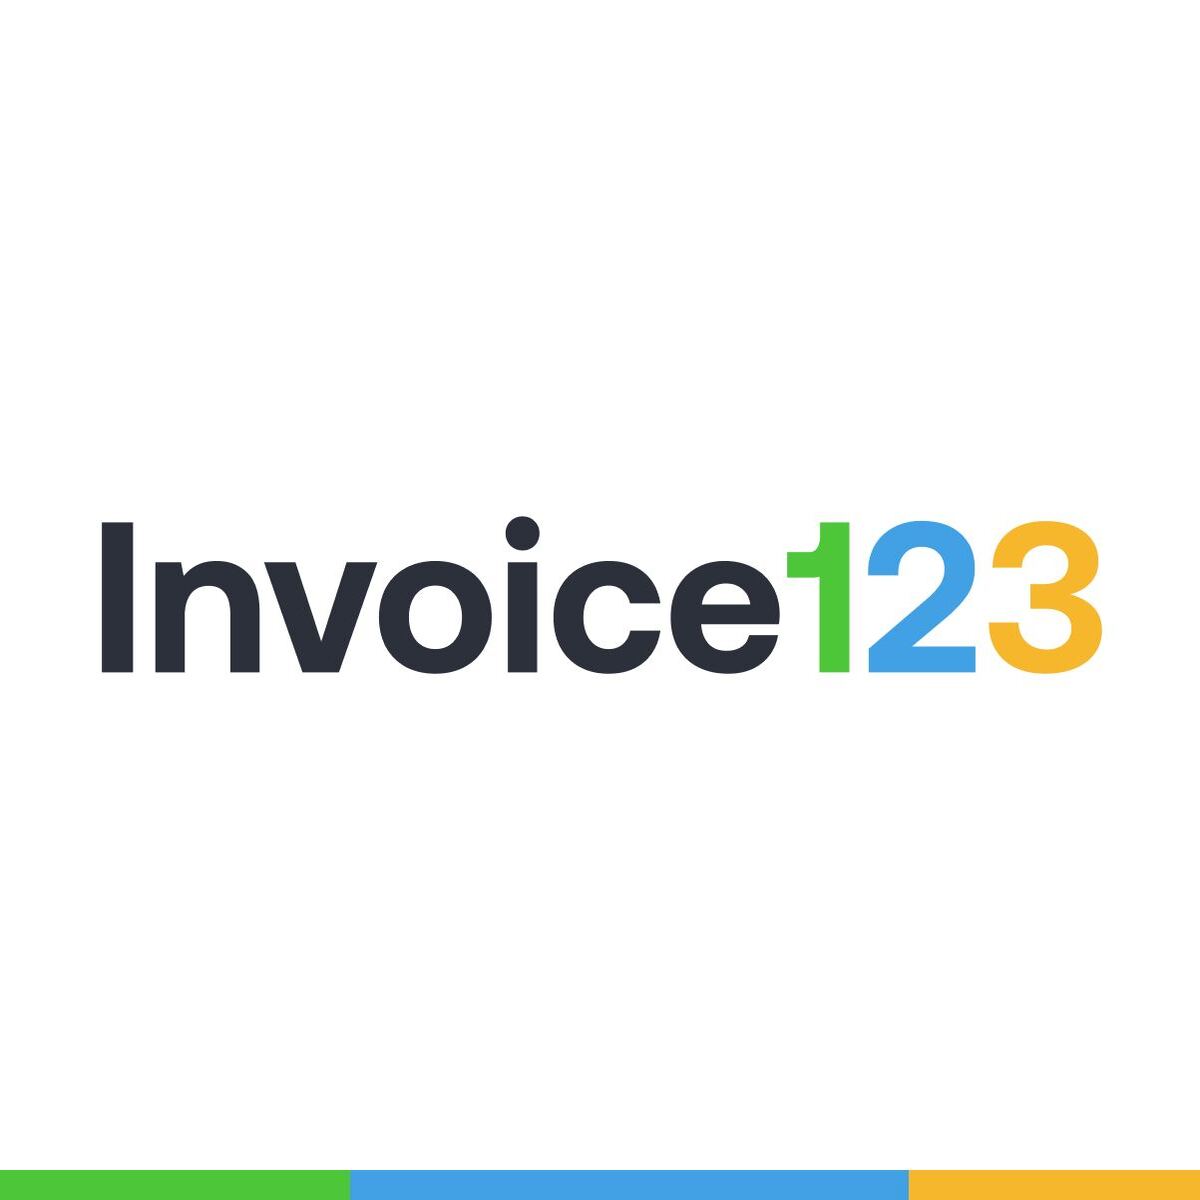 Hire Shopify Experts to integrate Invoice 123 app into a Shopify store